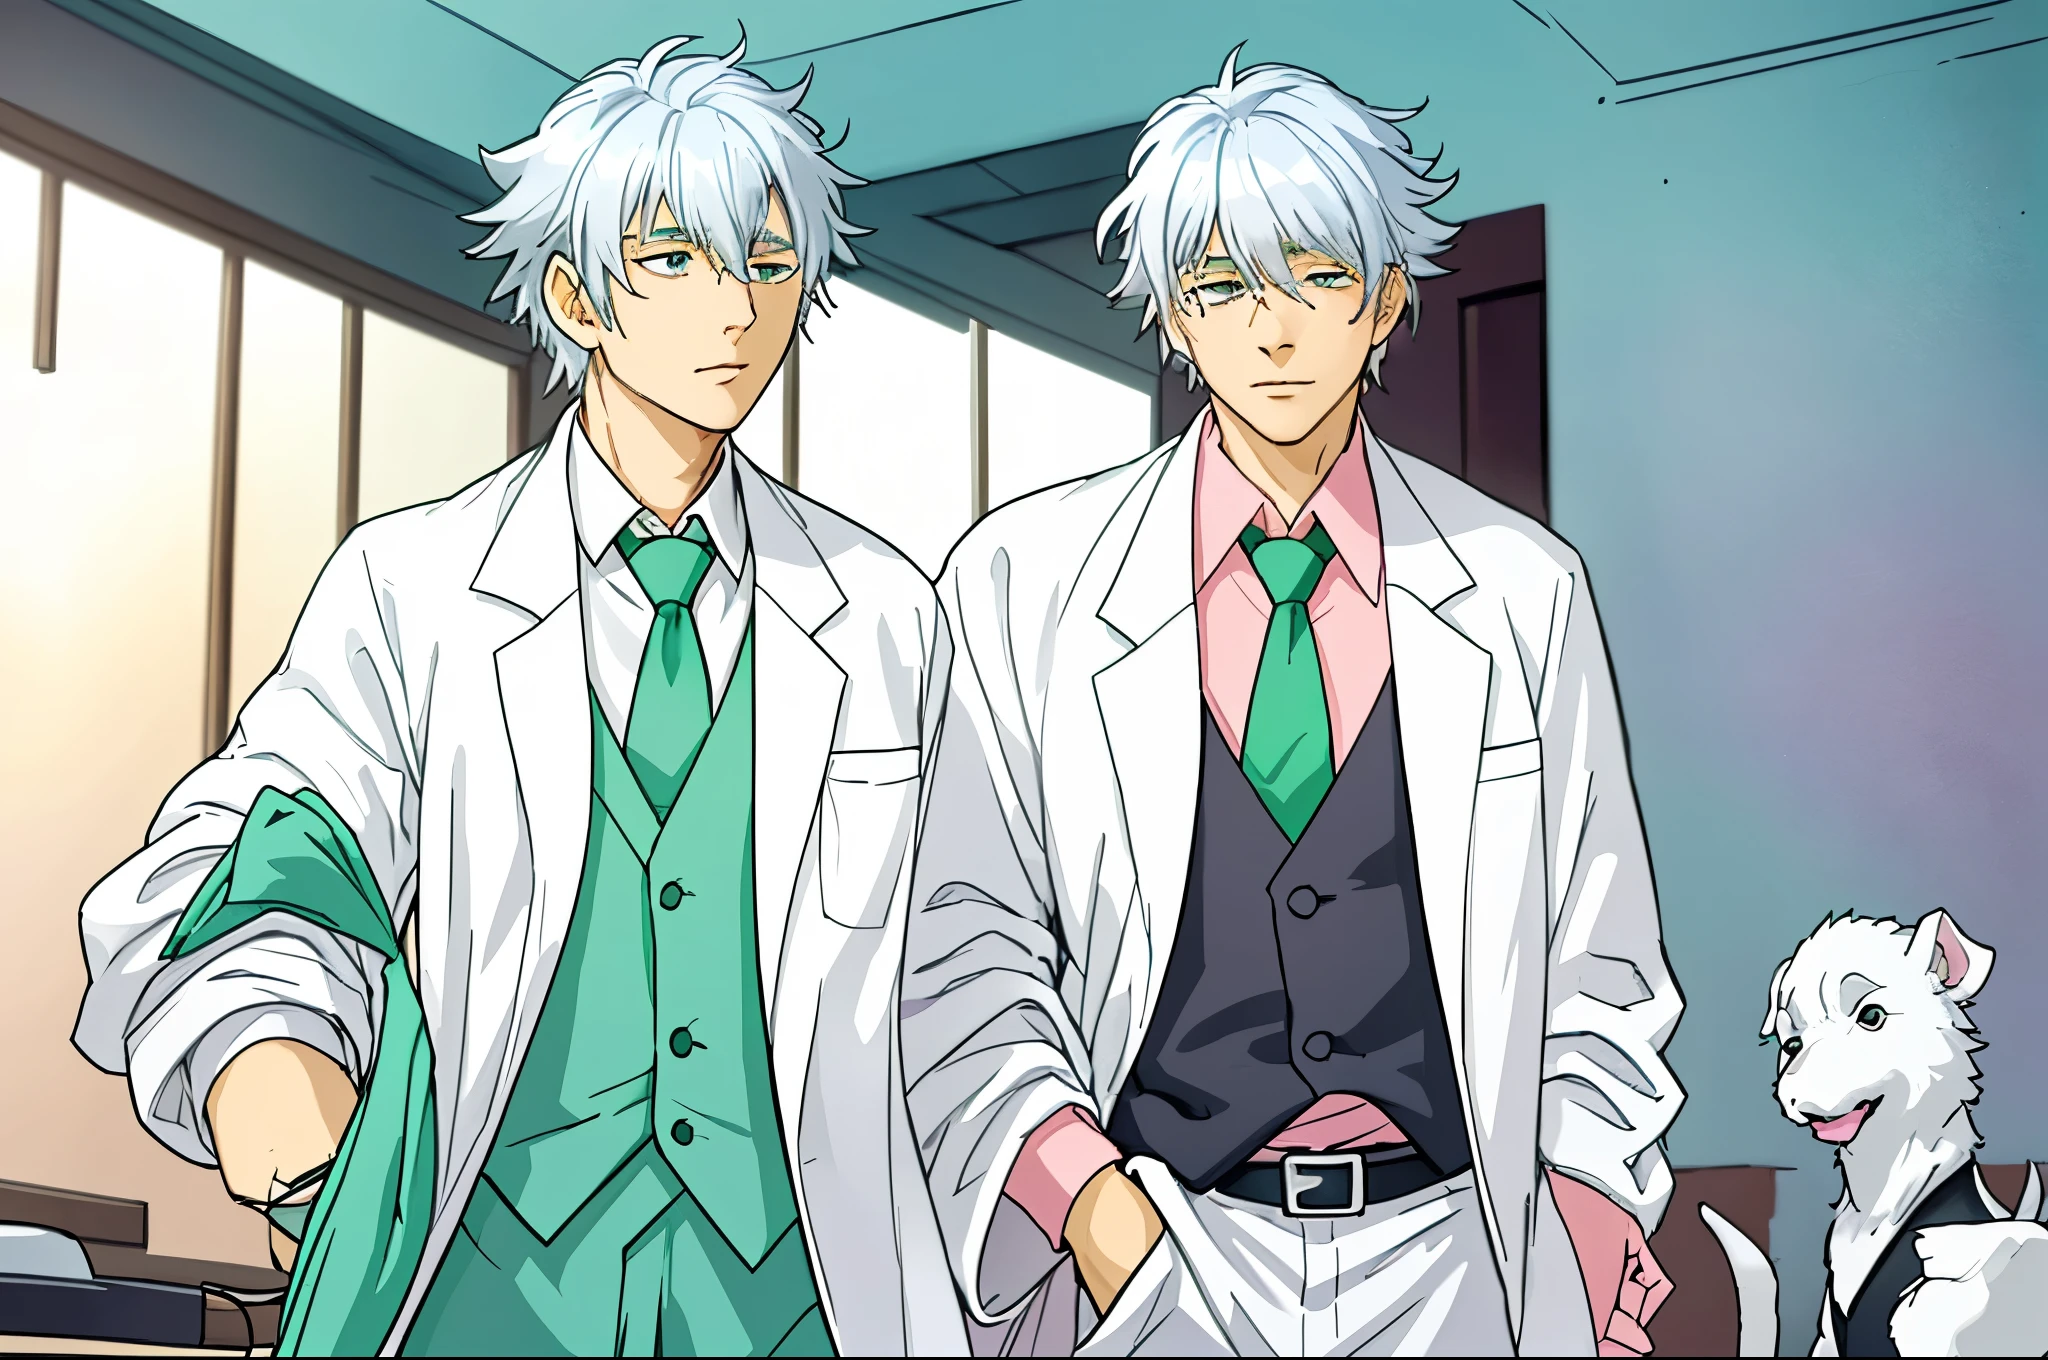 silver haired guy, white lab coat, green tie, pink shirt